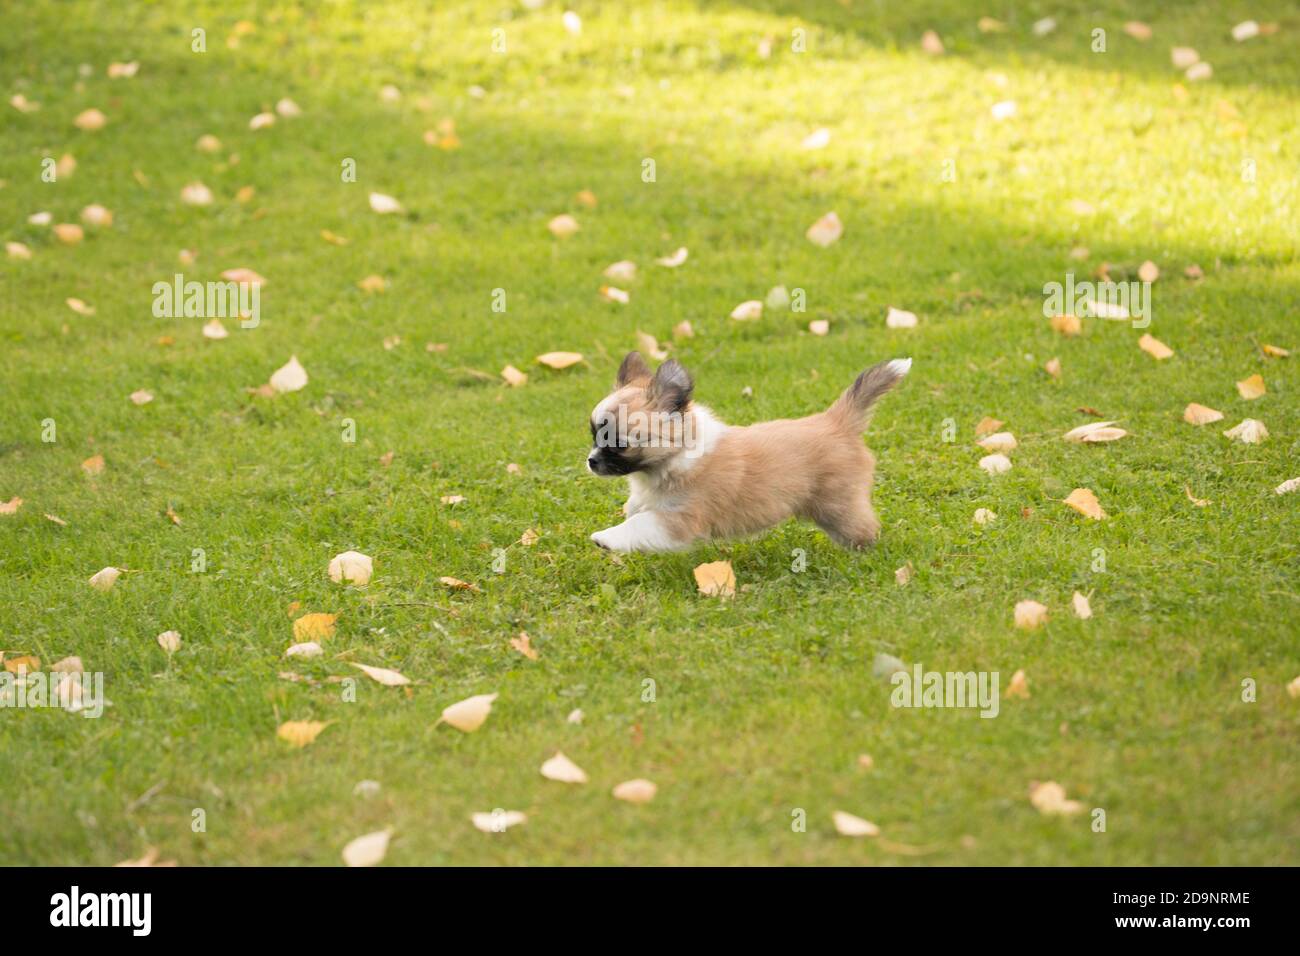 Chihuahua puppy, longhaired, runs on the lawn, autumnal scene, Finland Stock Photo